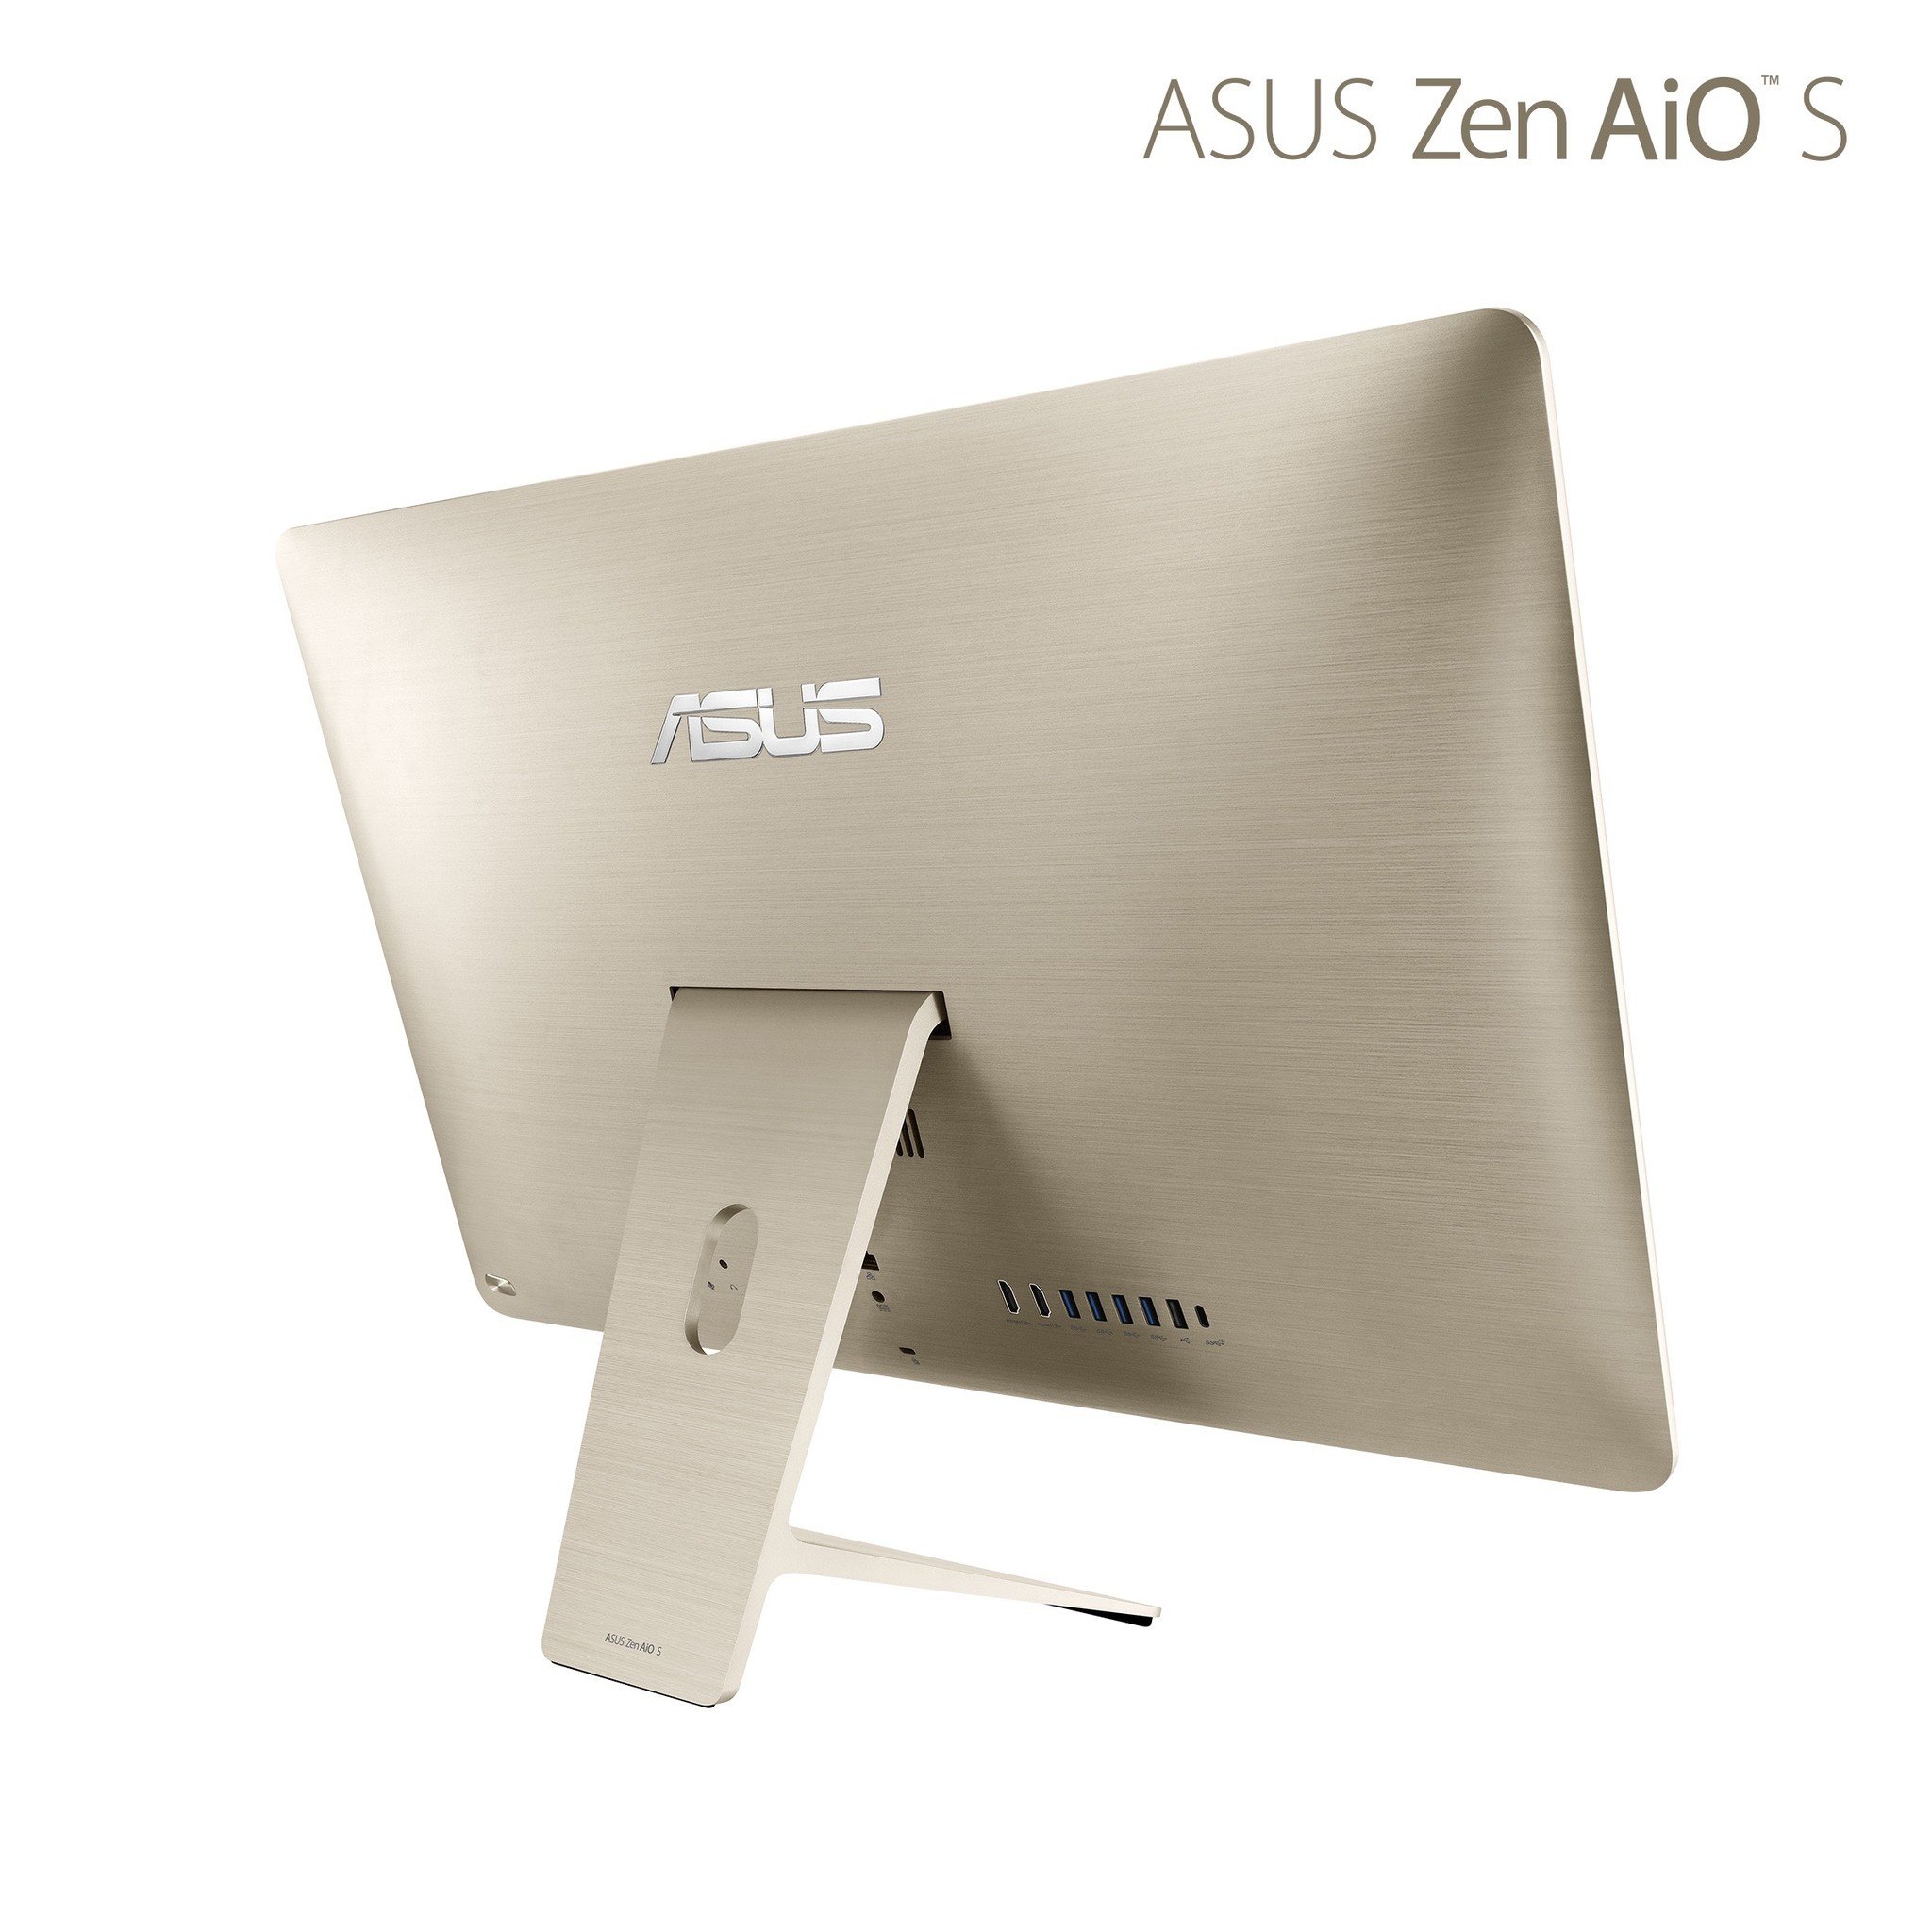 ASUS' latest all-in-one PC offers a 4K display in a stunning 